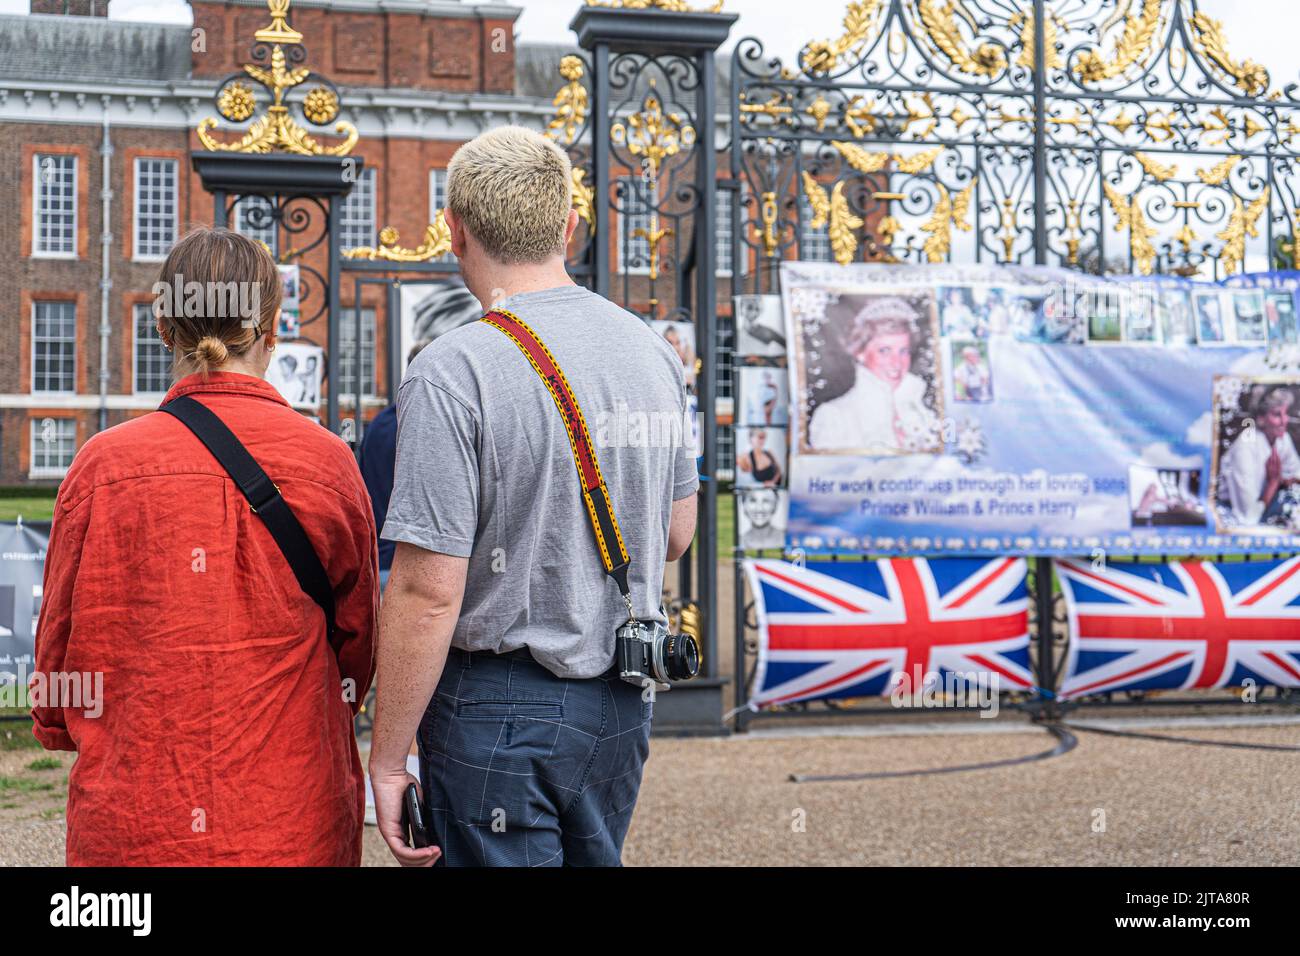 London, UK. 29 August 2022  Visitors view  the memorabilia and tributes  attached by royal fans at  the gates  of the former  residence of  Diana, Princess of Wales at Kensington Palace before  the 25th anniversary of her death on 31 August 1997 . Credit. amer ghazzal/Alamy Live News Stock Photo